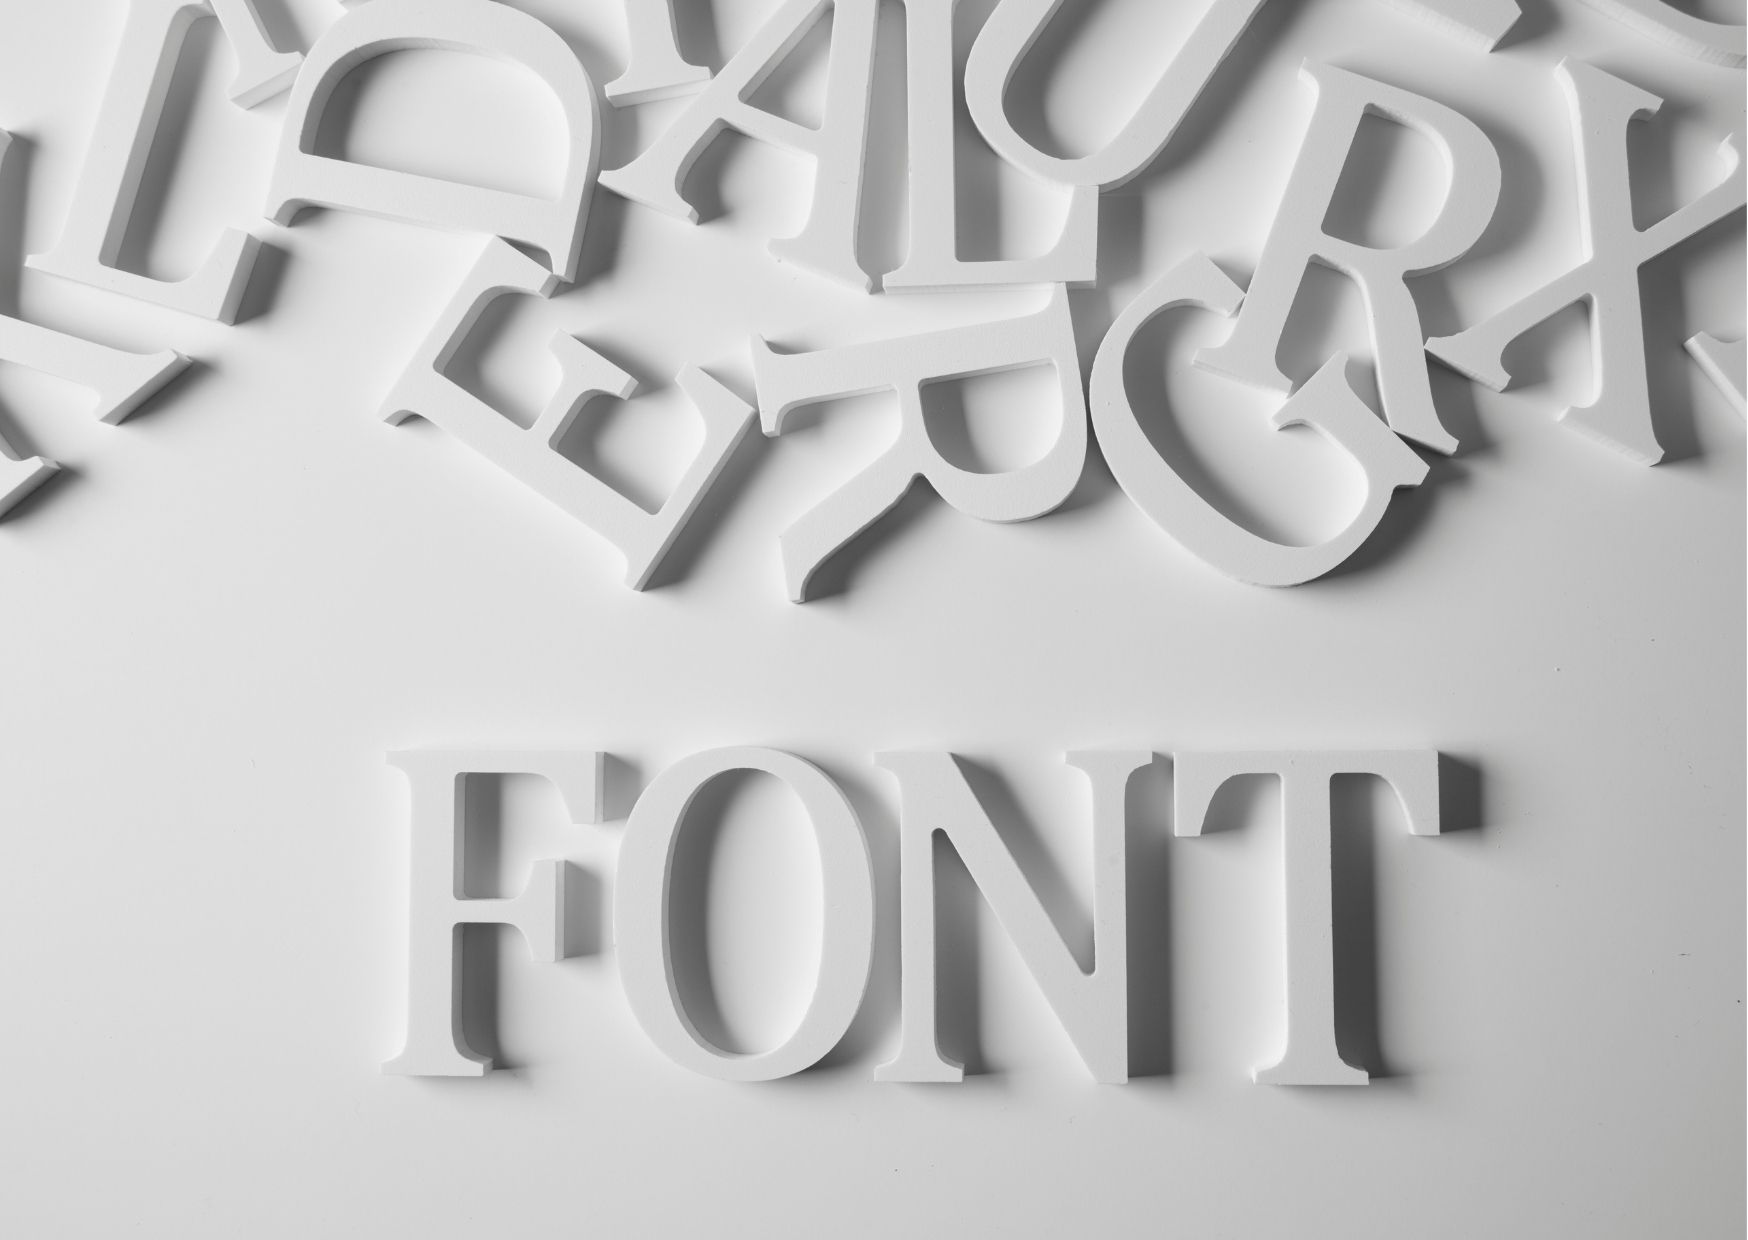 Graphic with various letters and the word "font"